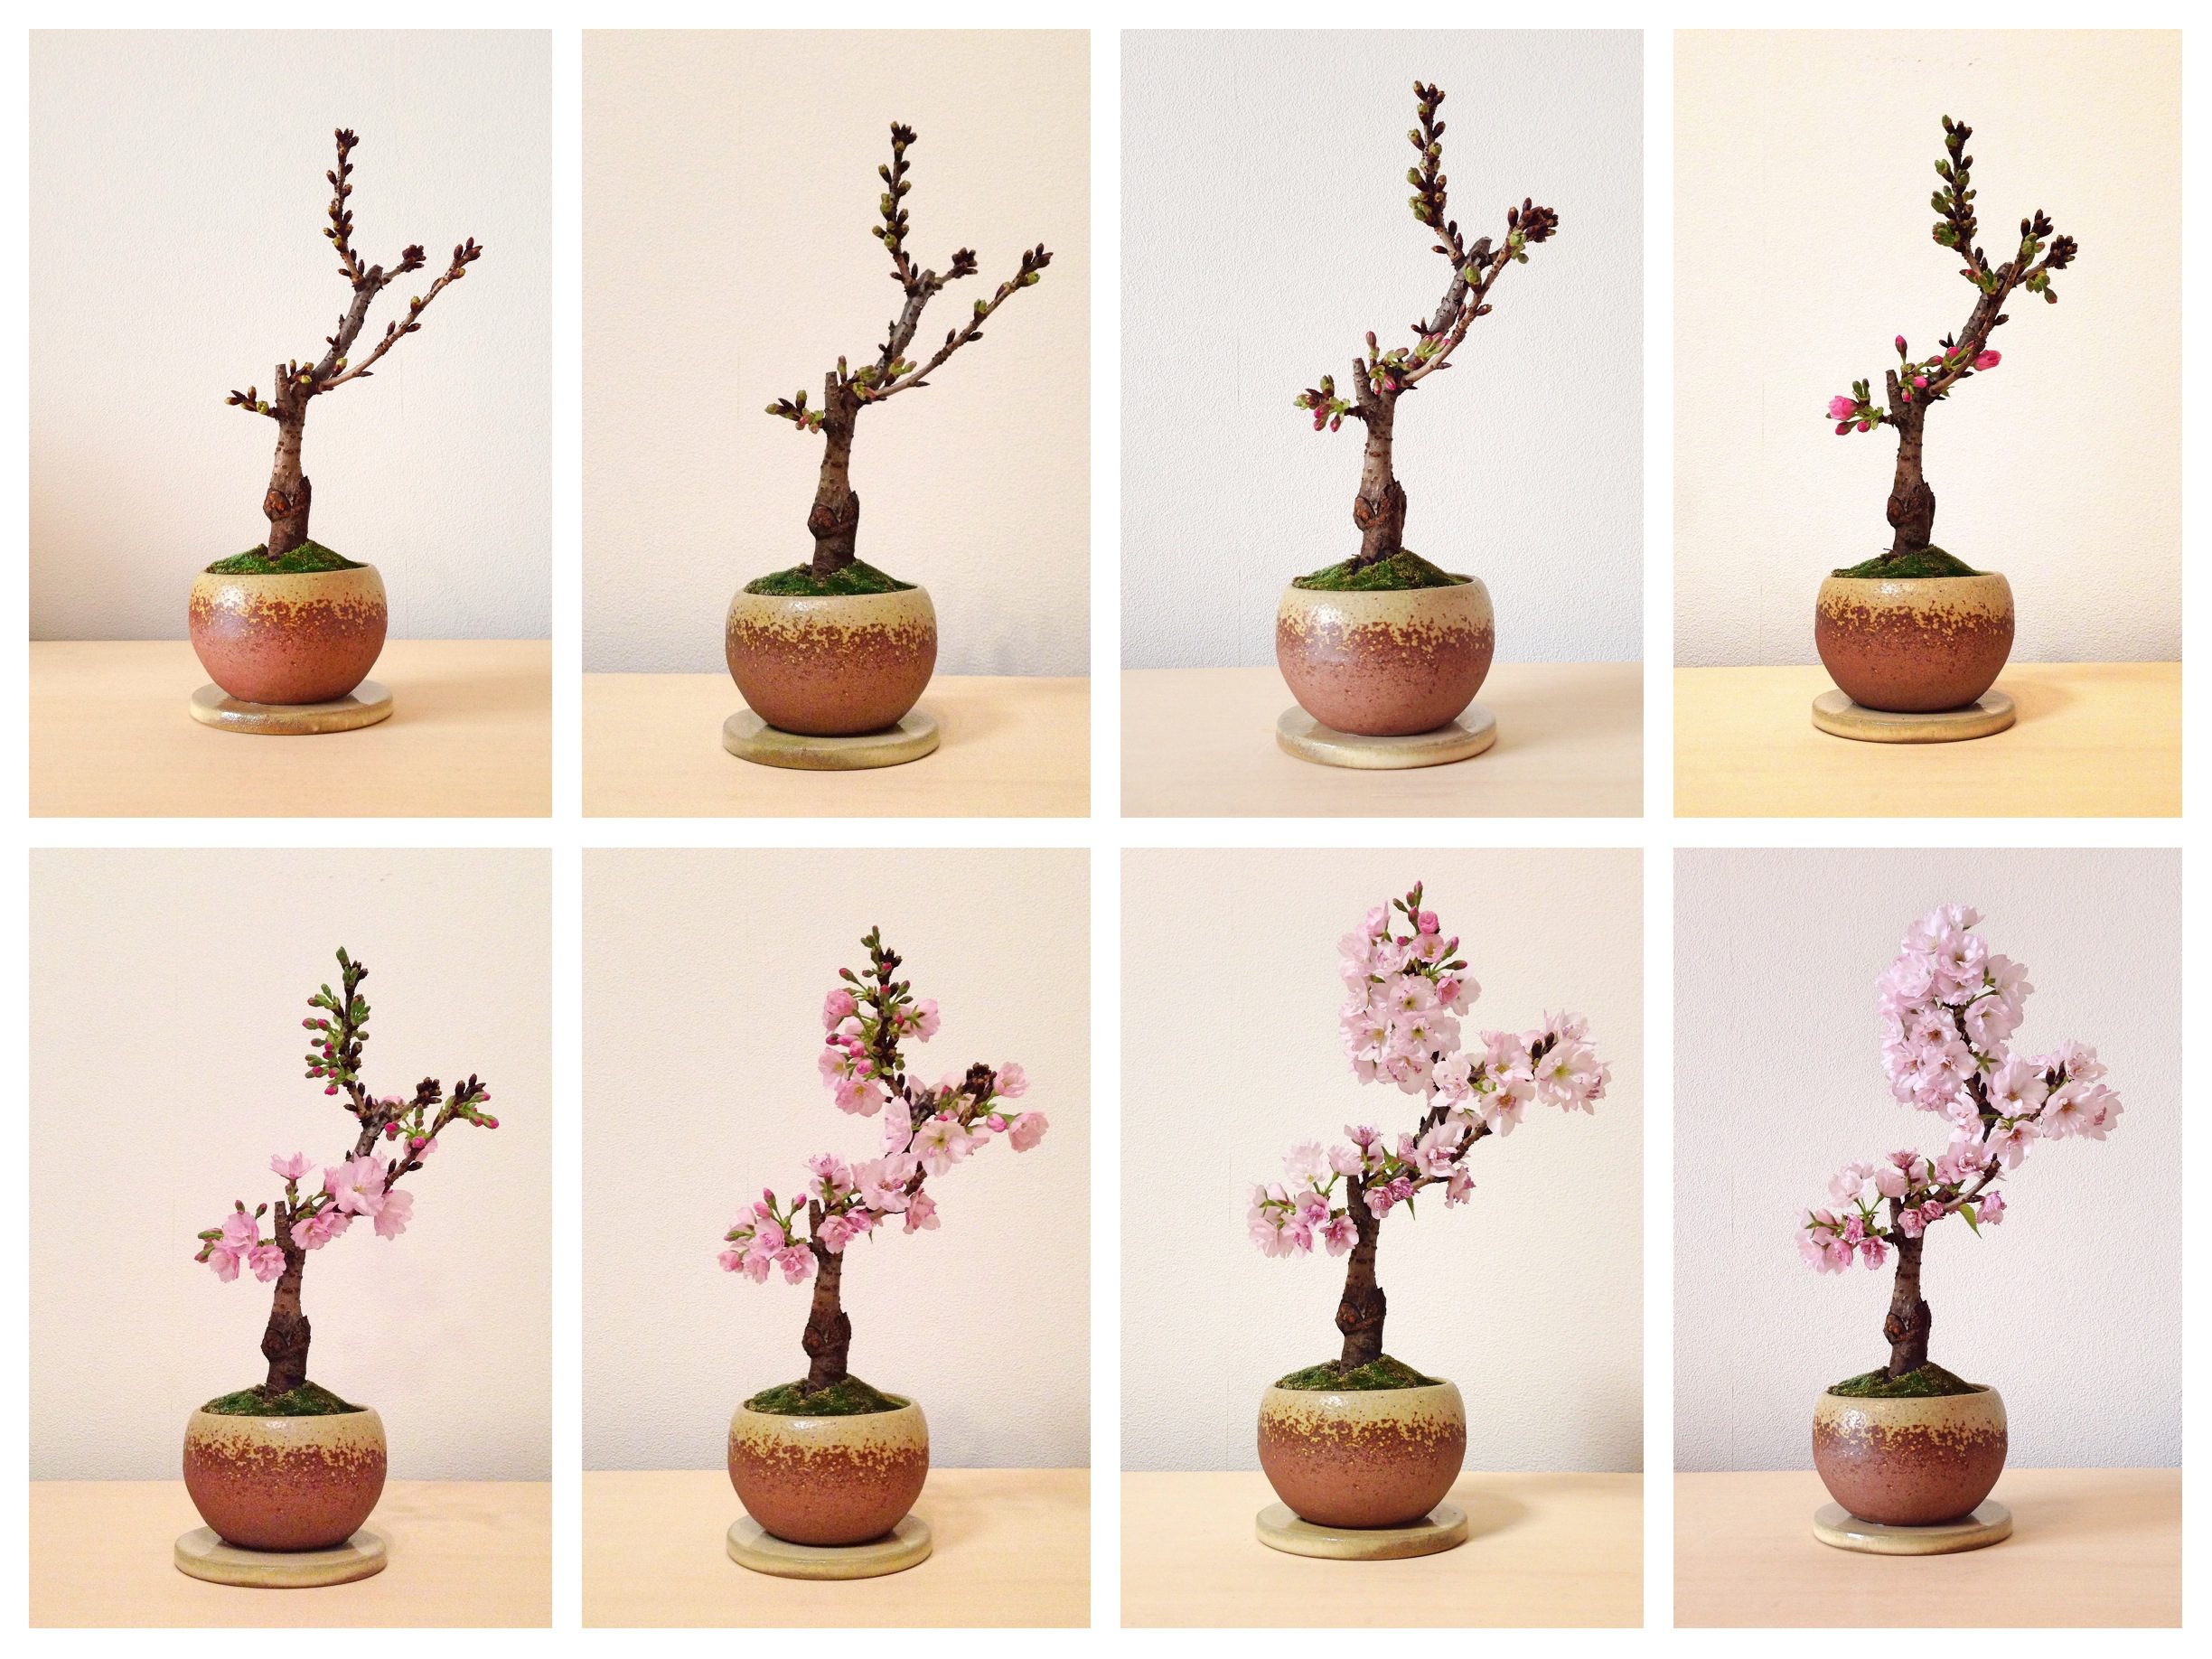 How To Care For Your Cherry Blossom Bonsai Tree